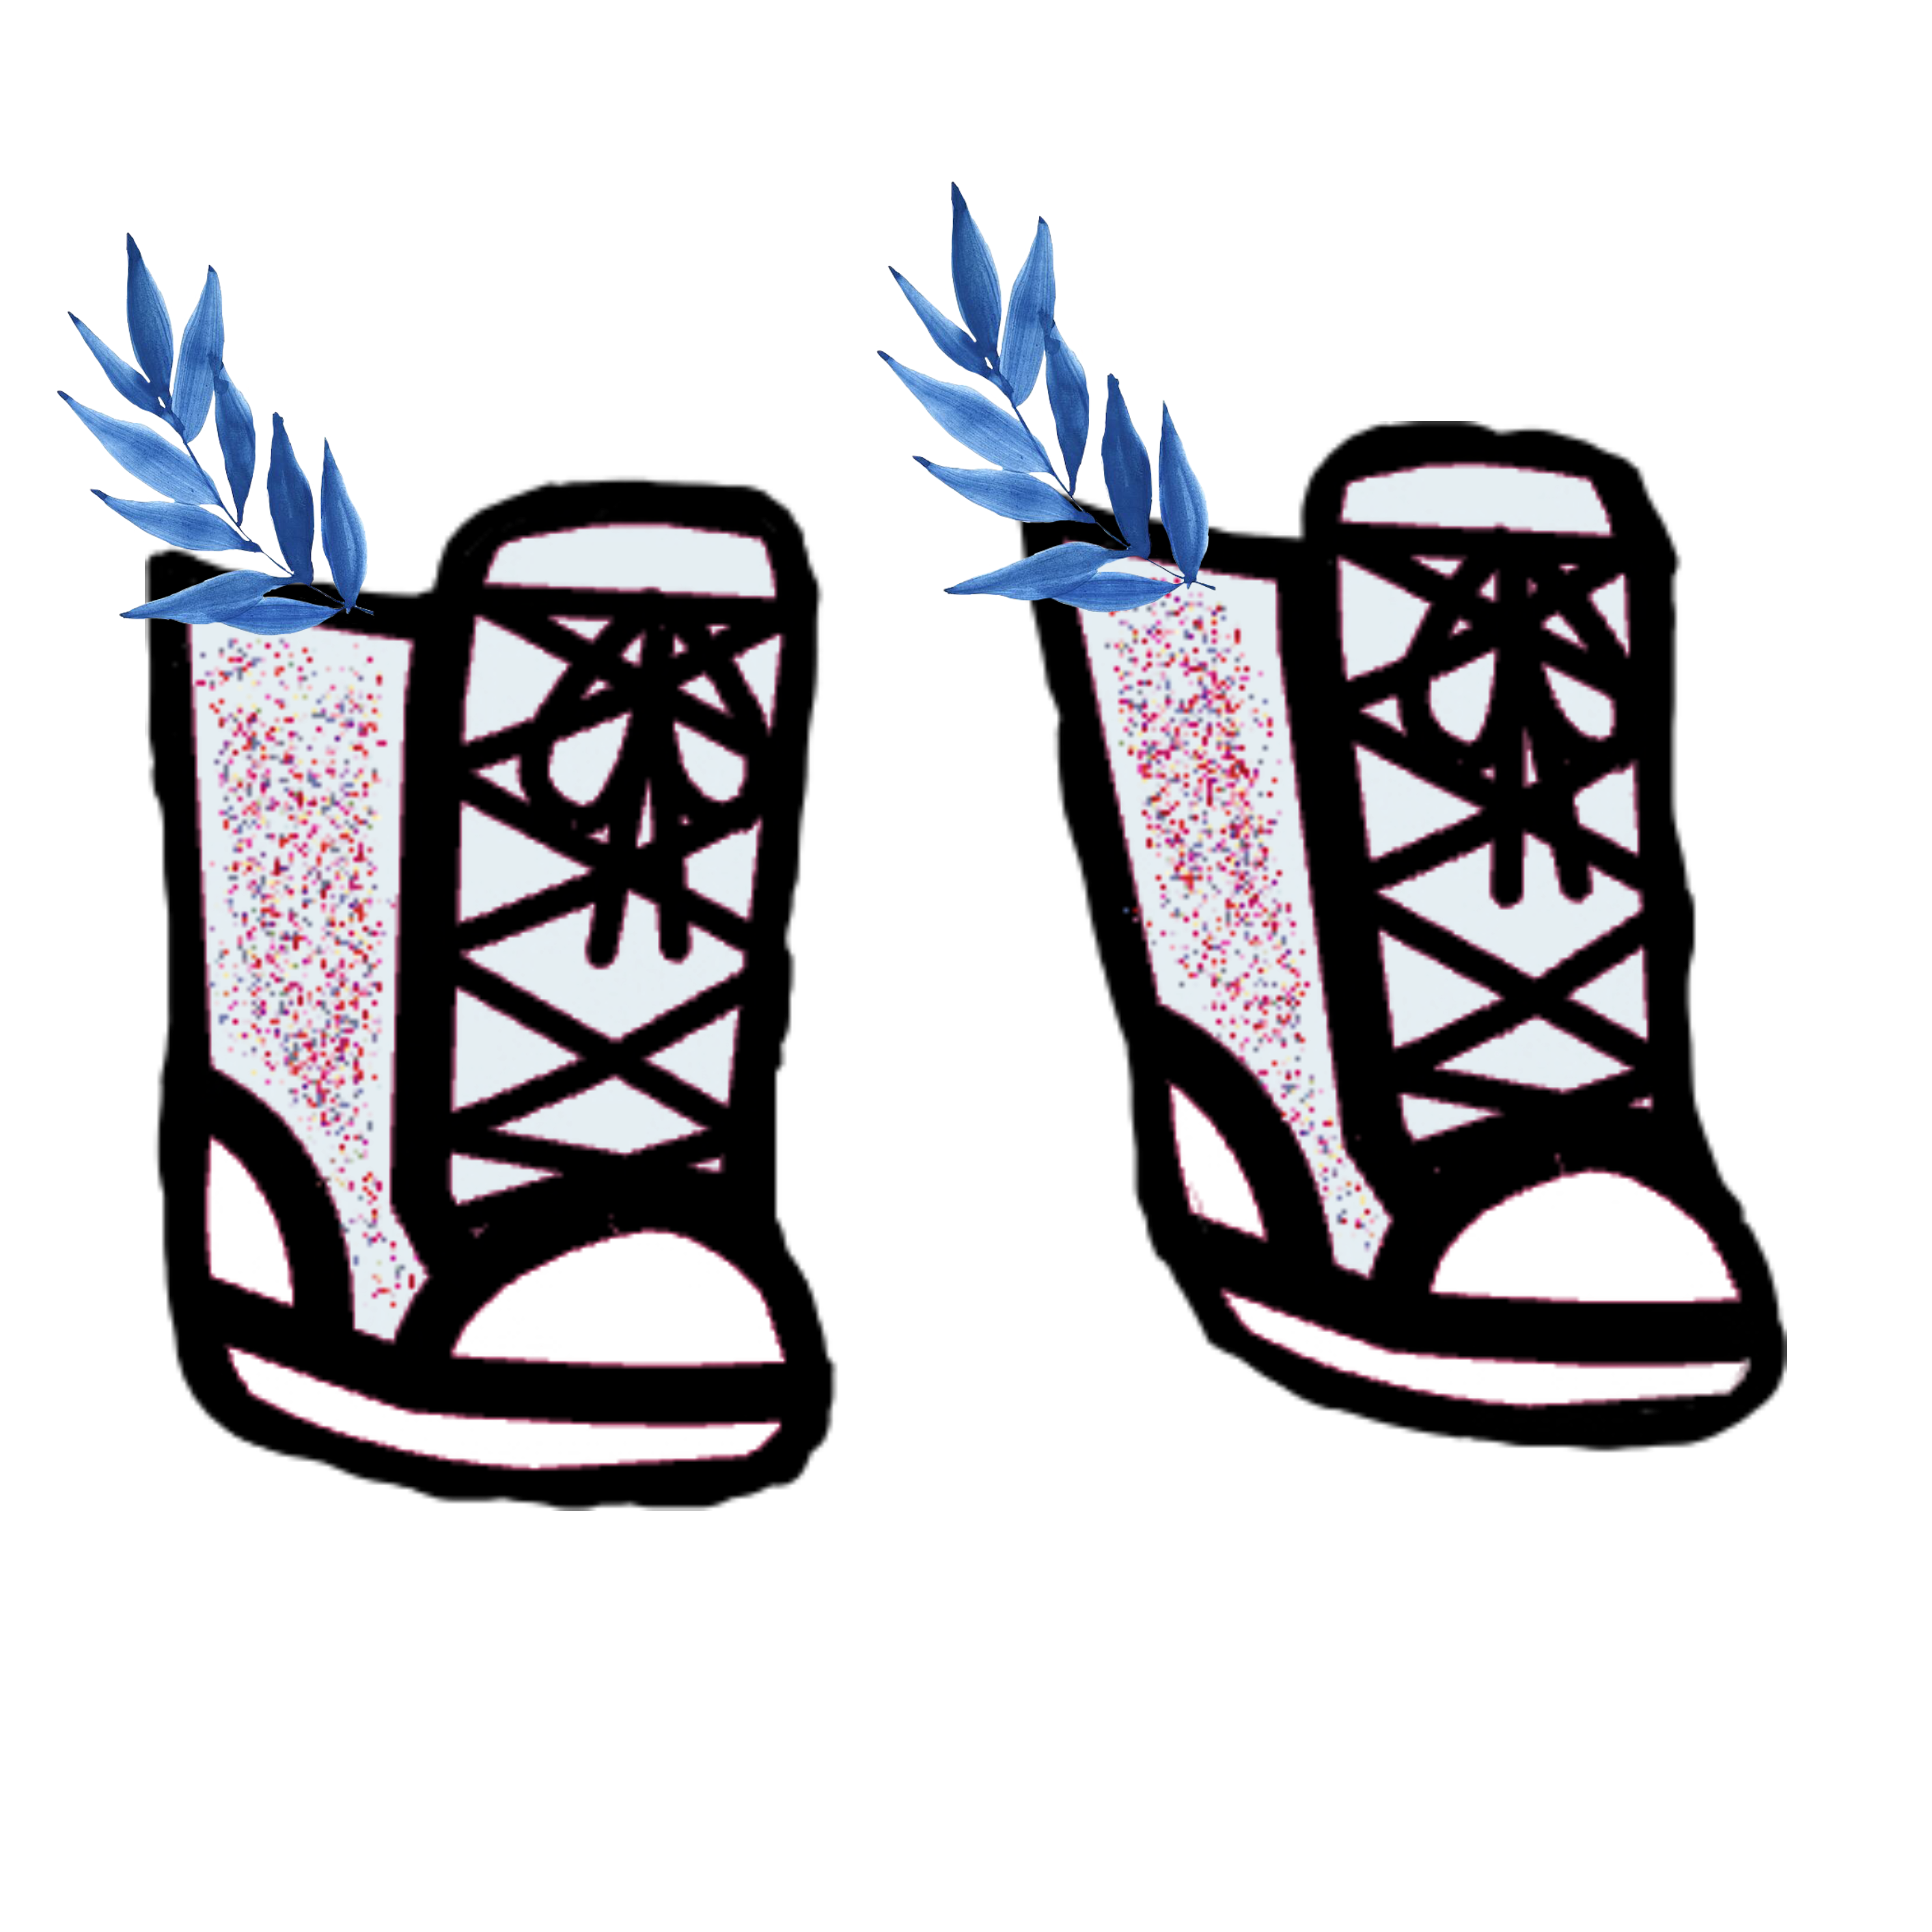 feather boots shoes gacha 298215950190211 by @dumbnathan.